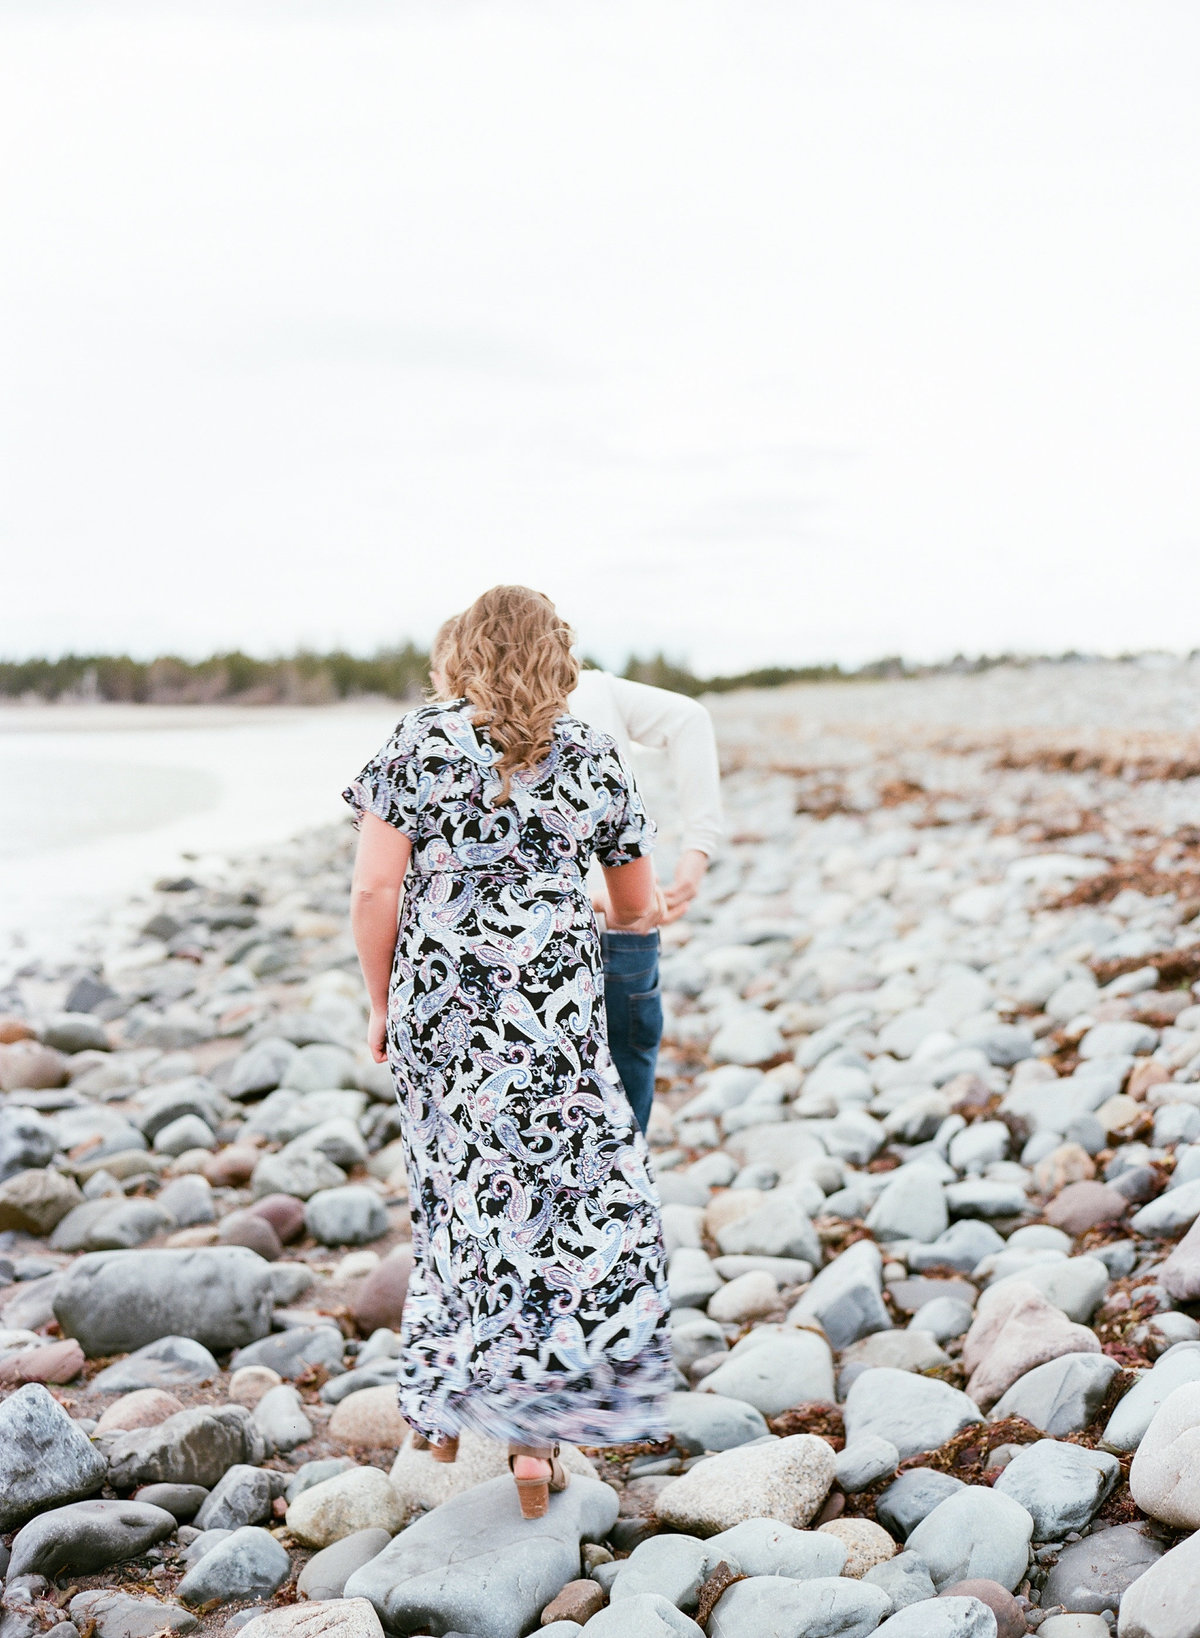 Jacqueline Anne Photography - Akayla and Andrew - Lawrencetown Beach-8